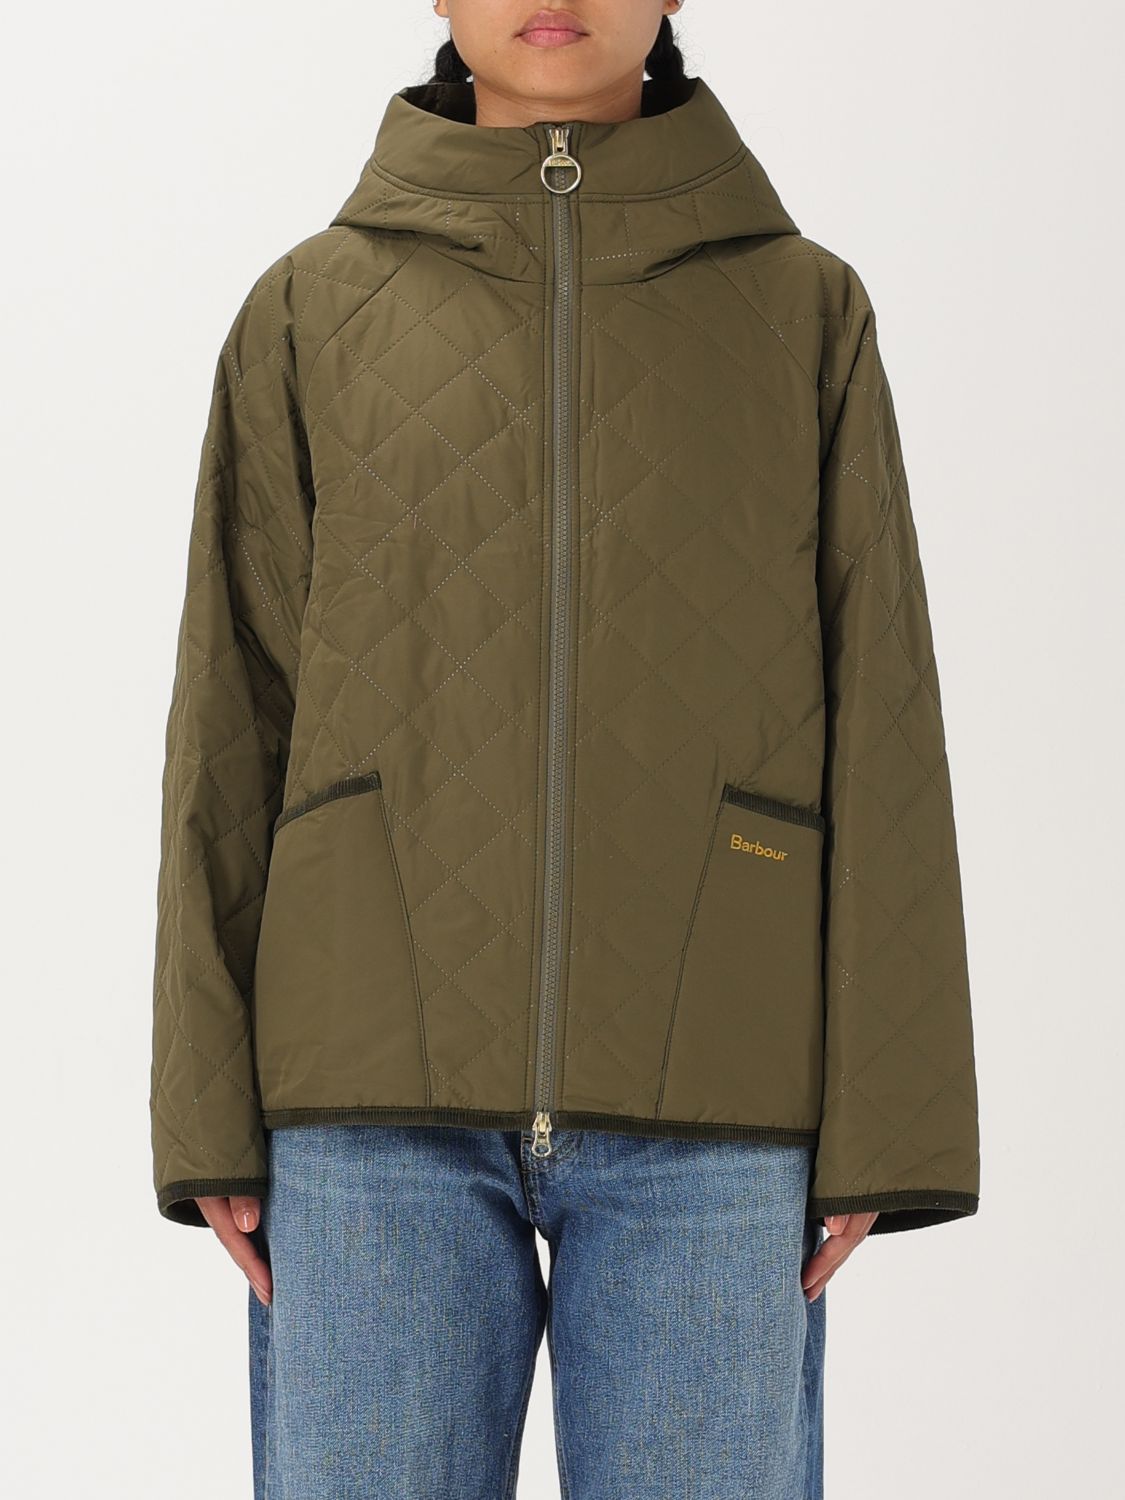 Barbour Jacket BARBOUR Woman color Military